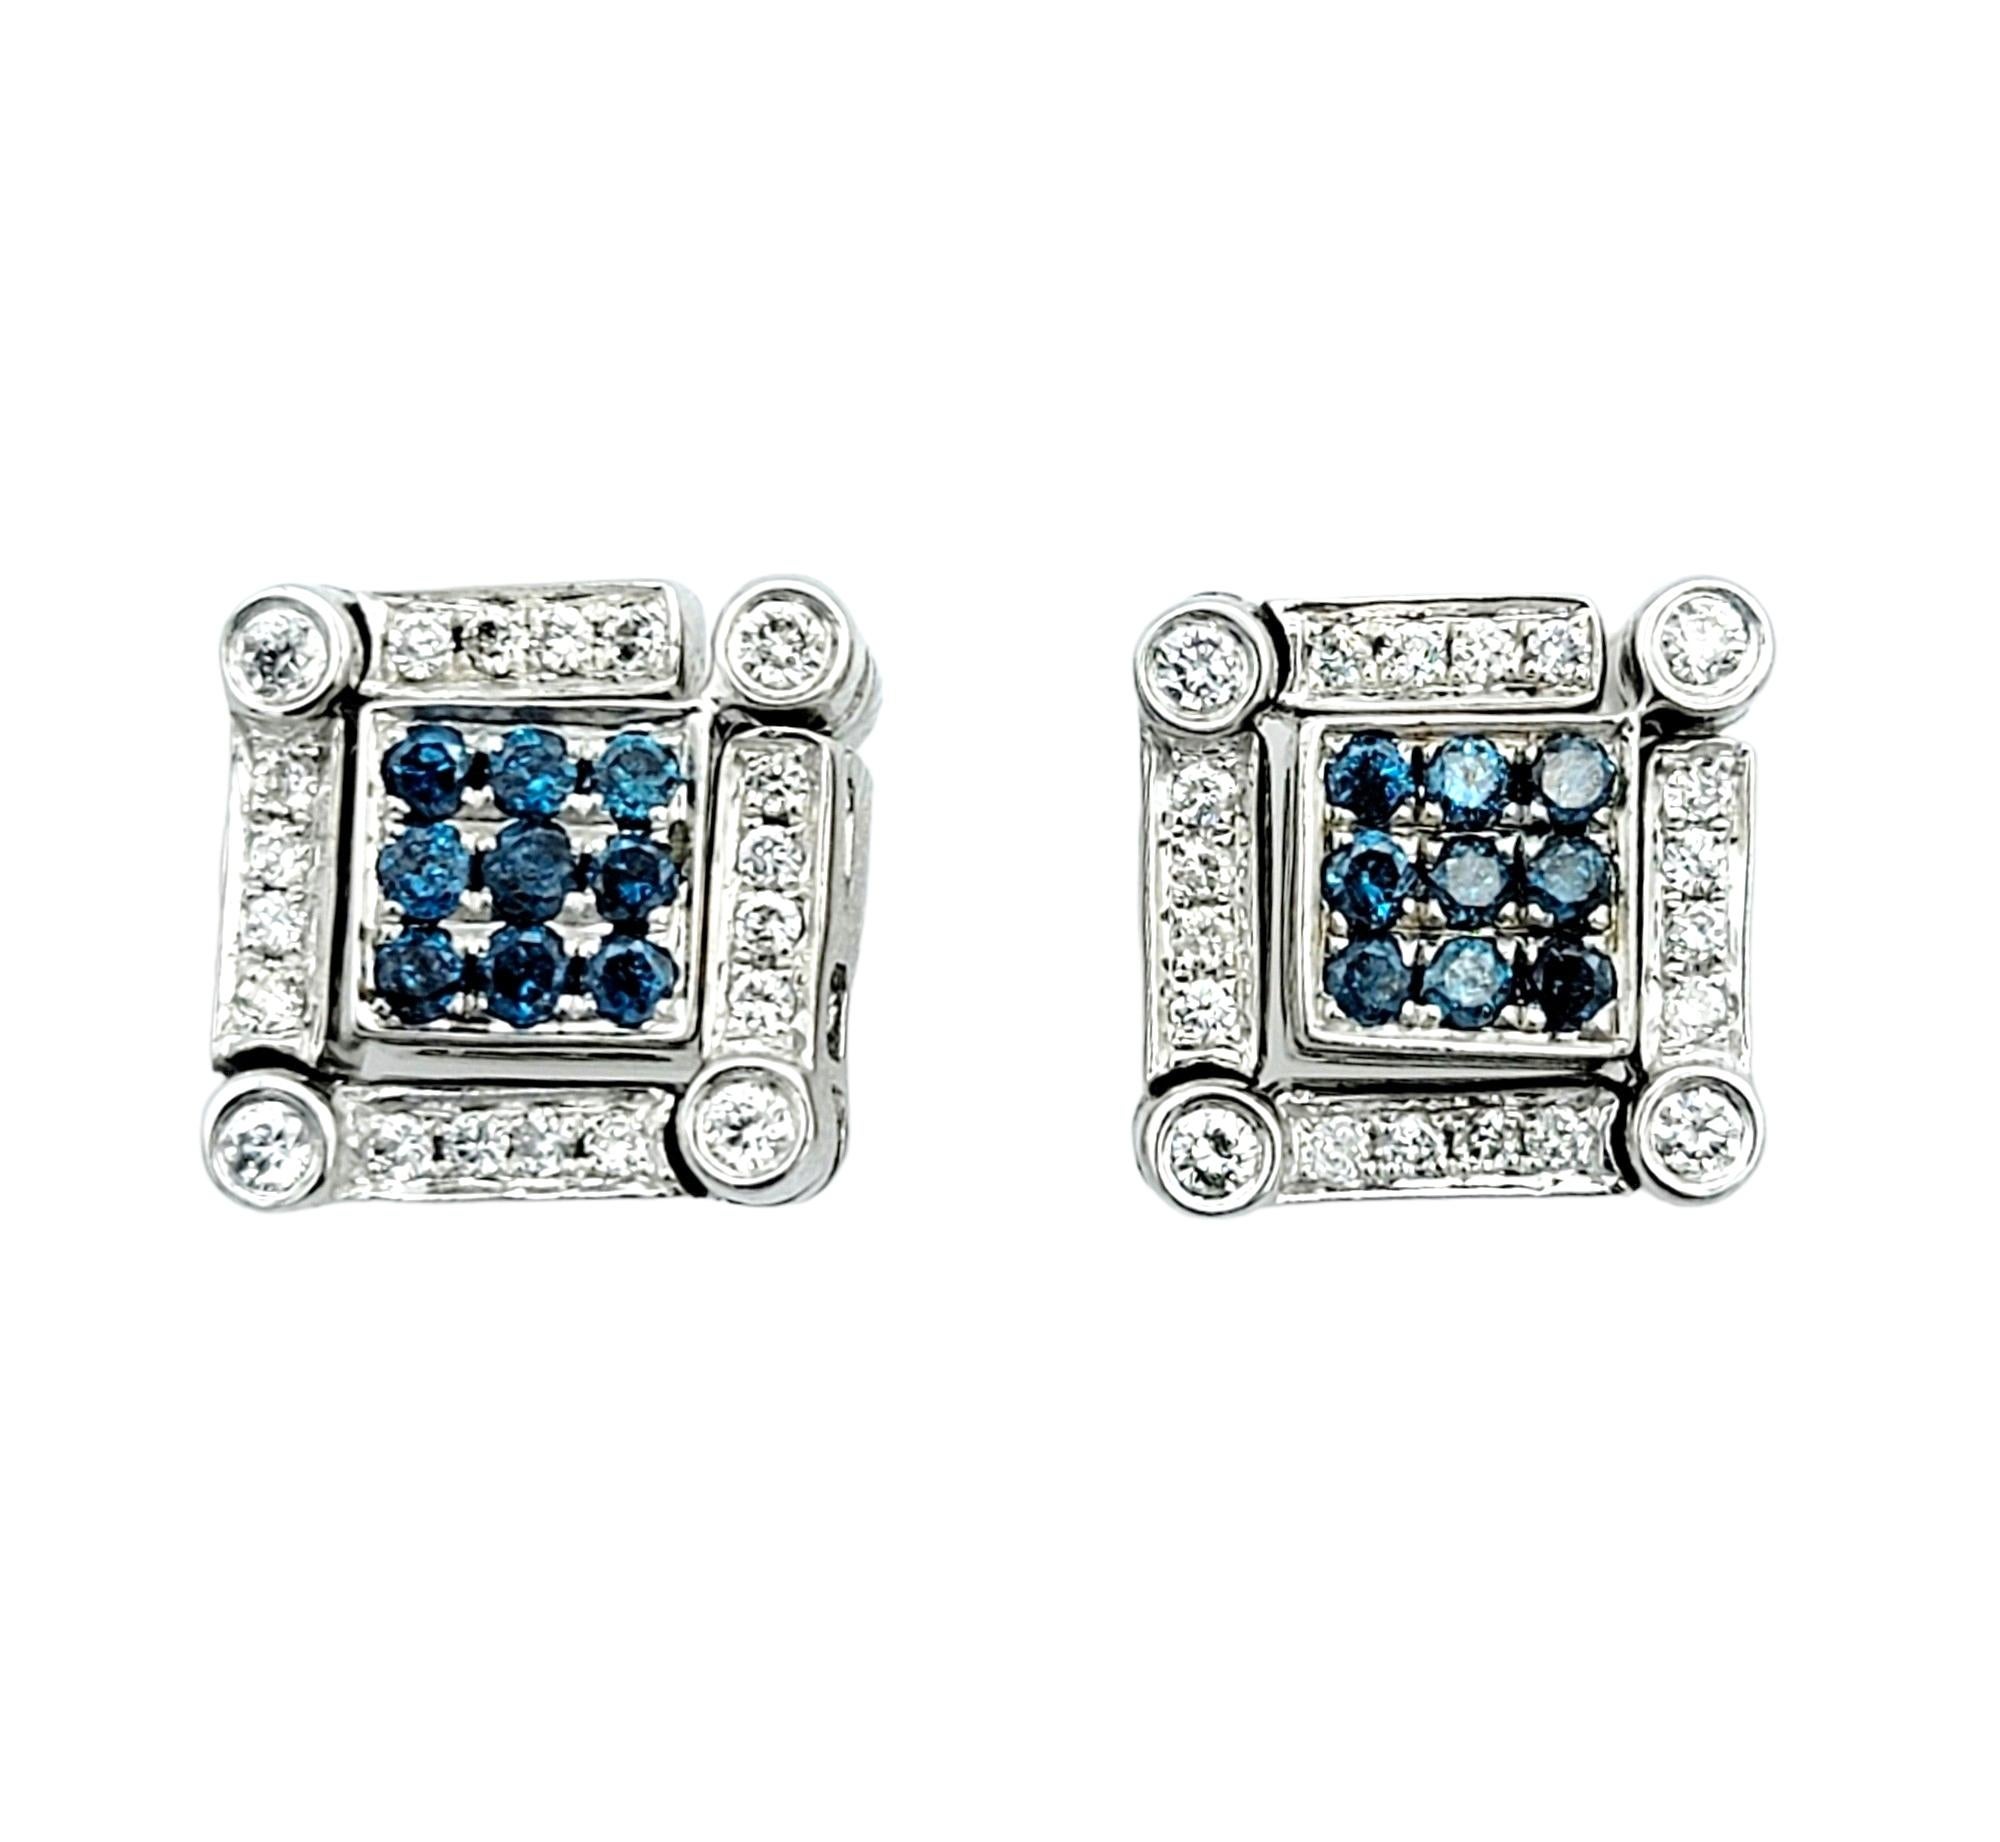 Contemporary Convertible White & Blue Diamond 4 Way Stud and Dangle 14K White Gold Earrings For Sale